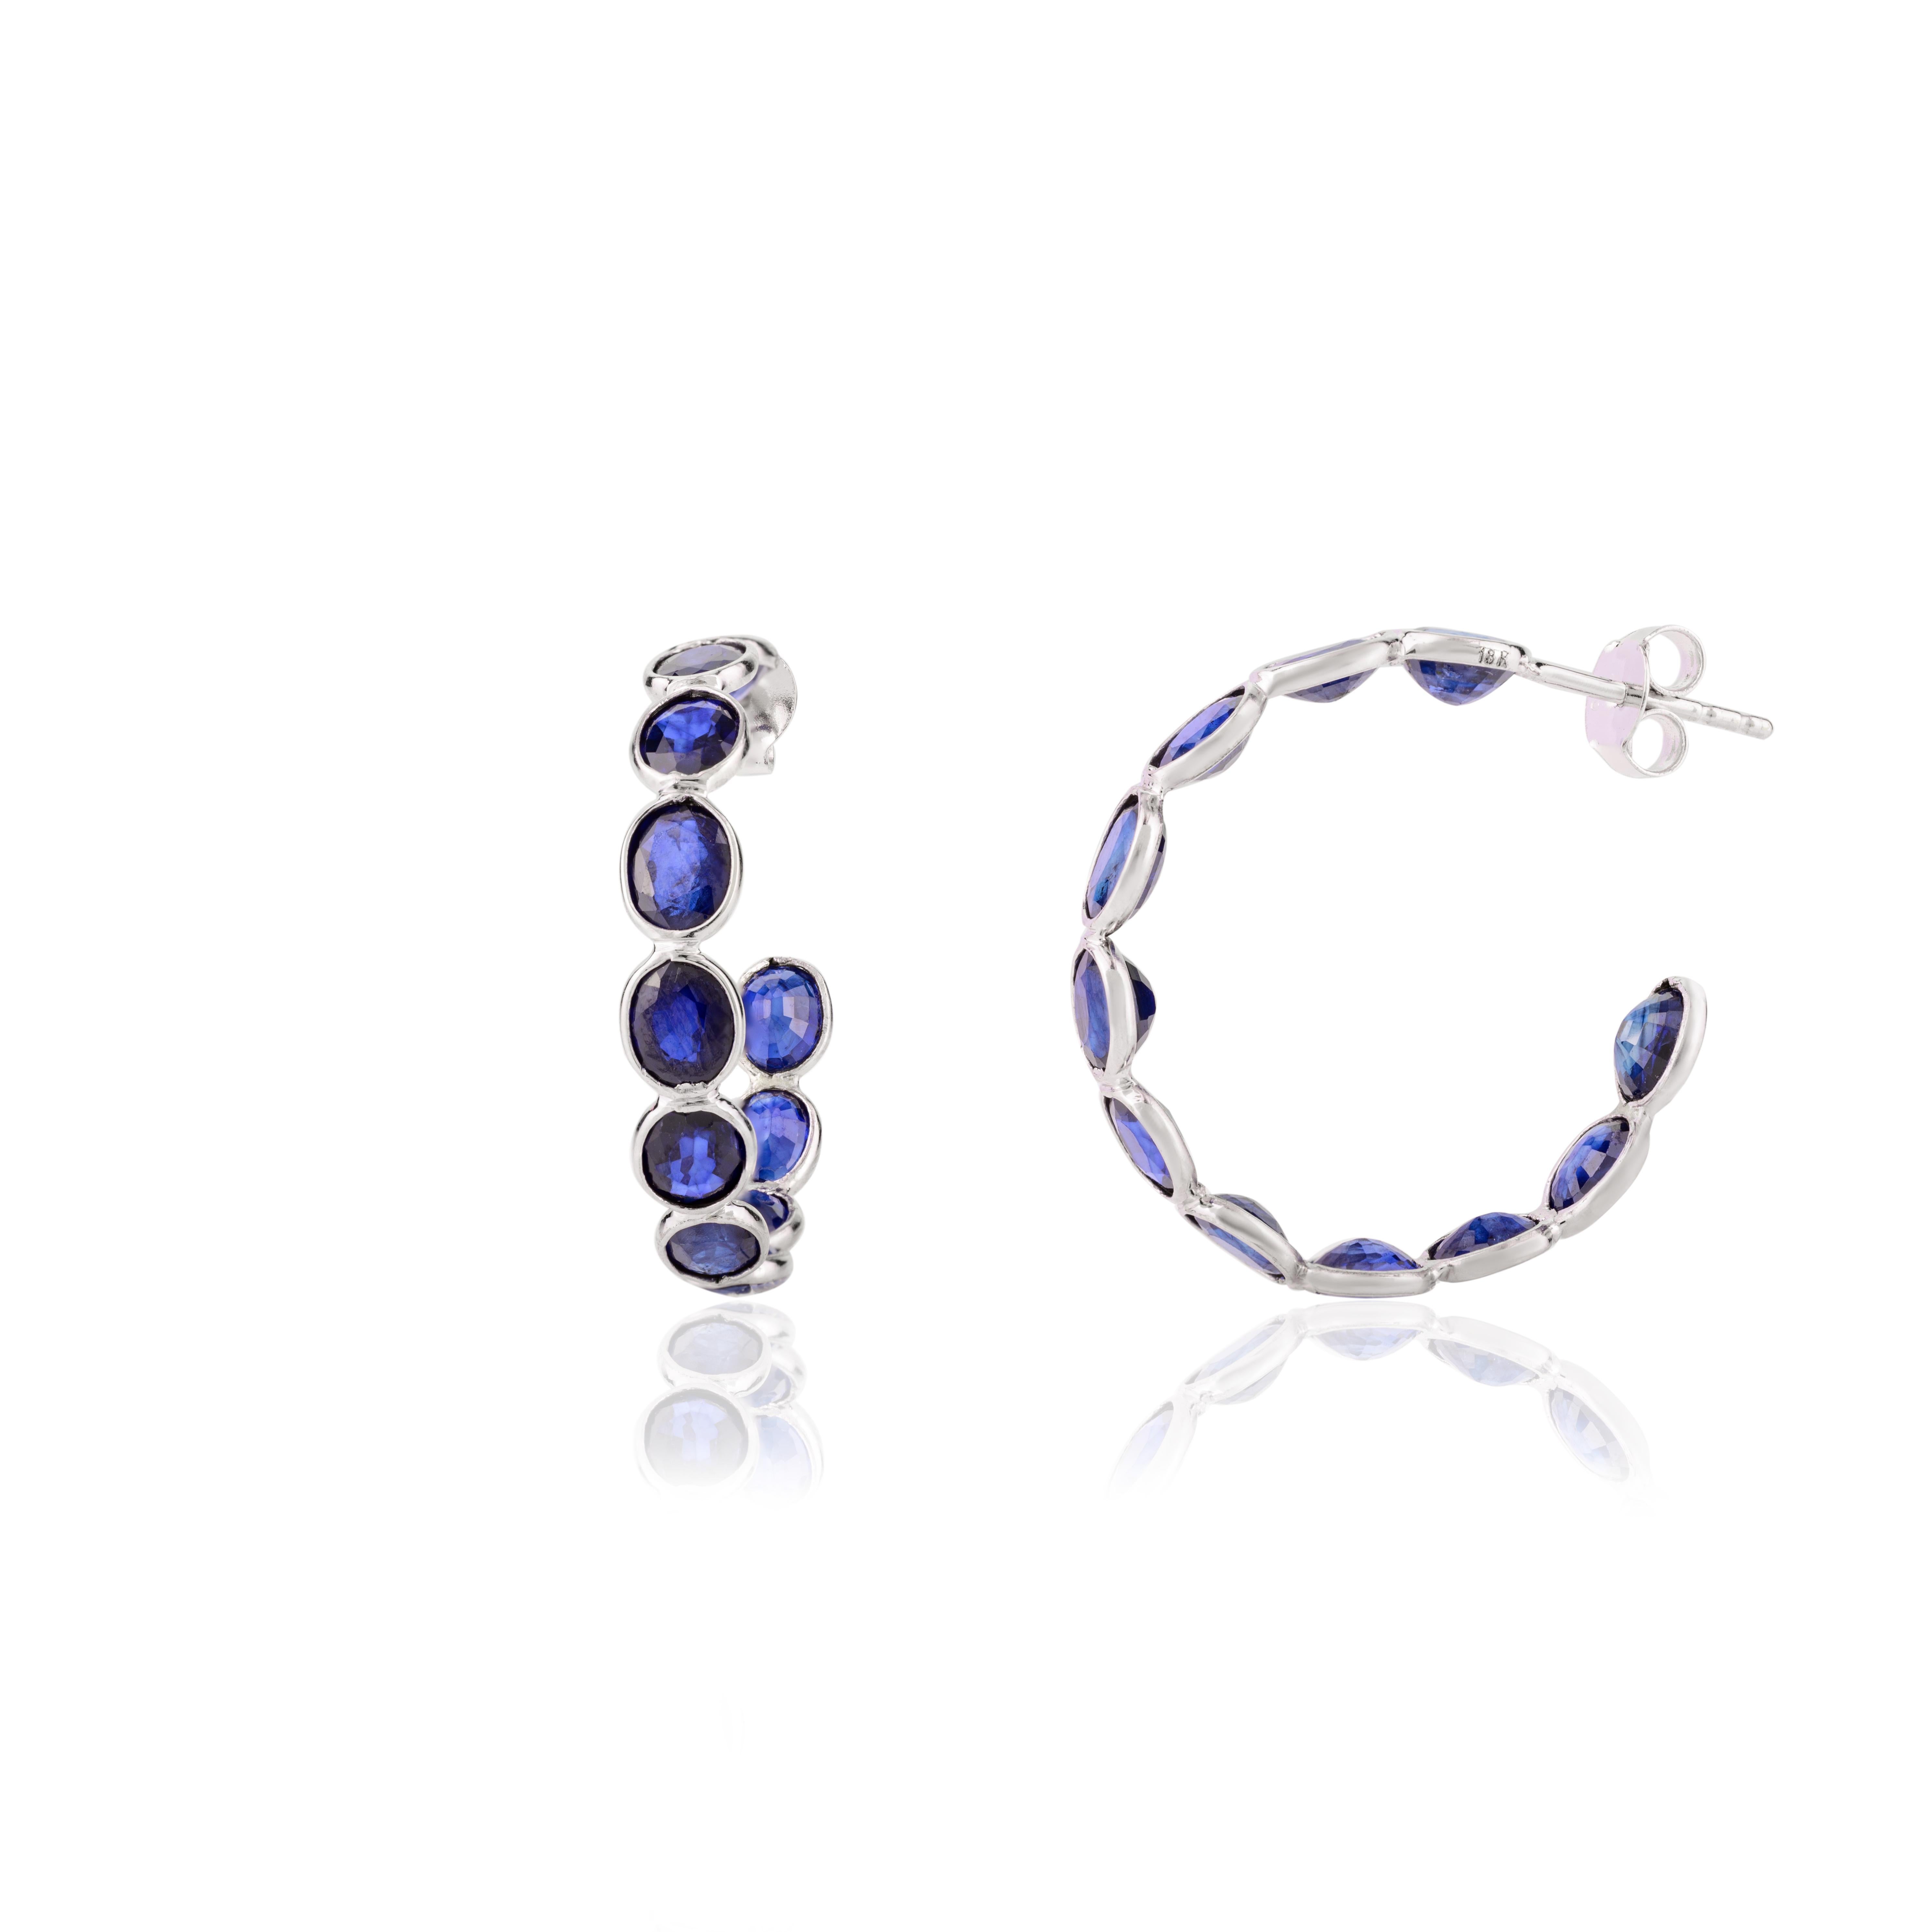 Handmade 9.07 Carat Blue Sapphire Hoop Earrings for Her in 18k Solid White Gold In New Condition For Sale In Houston, TX